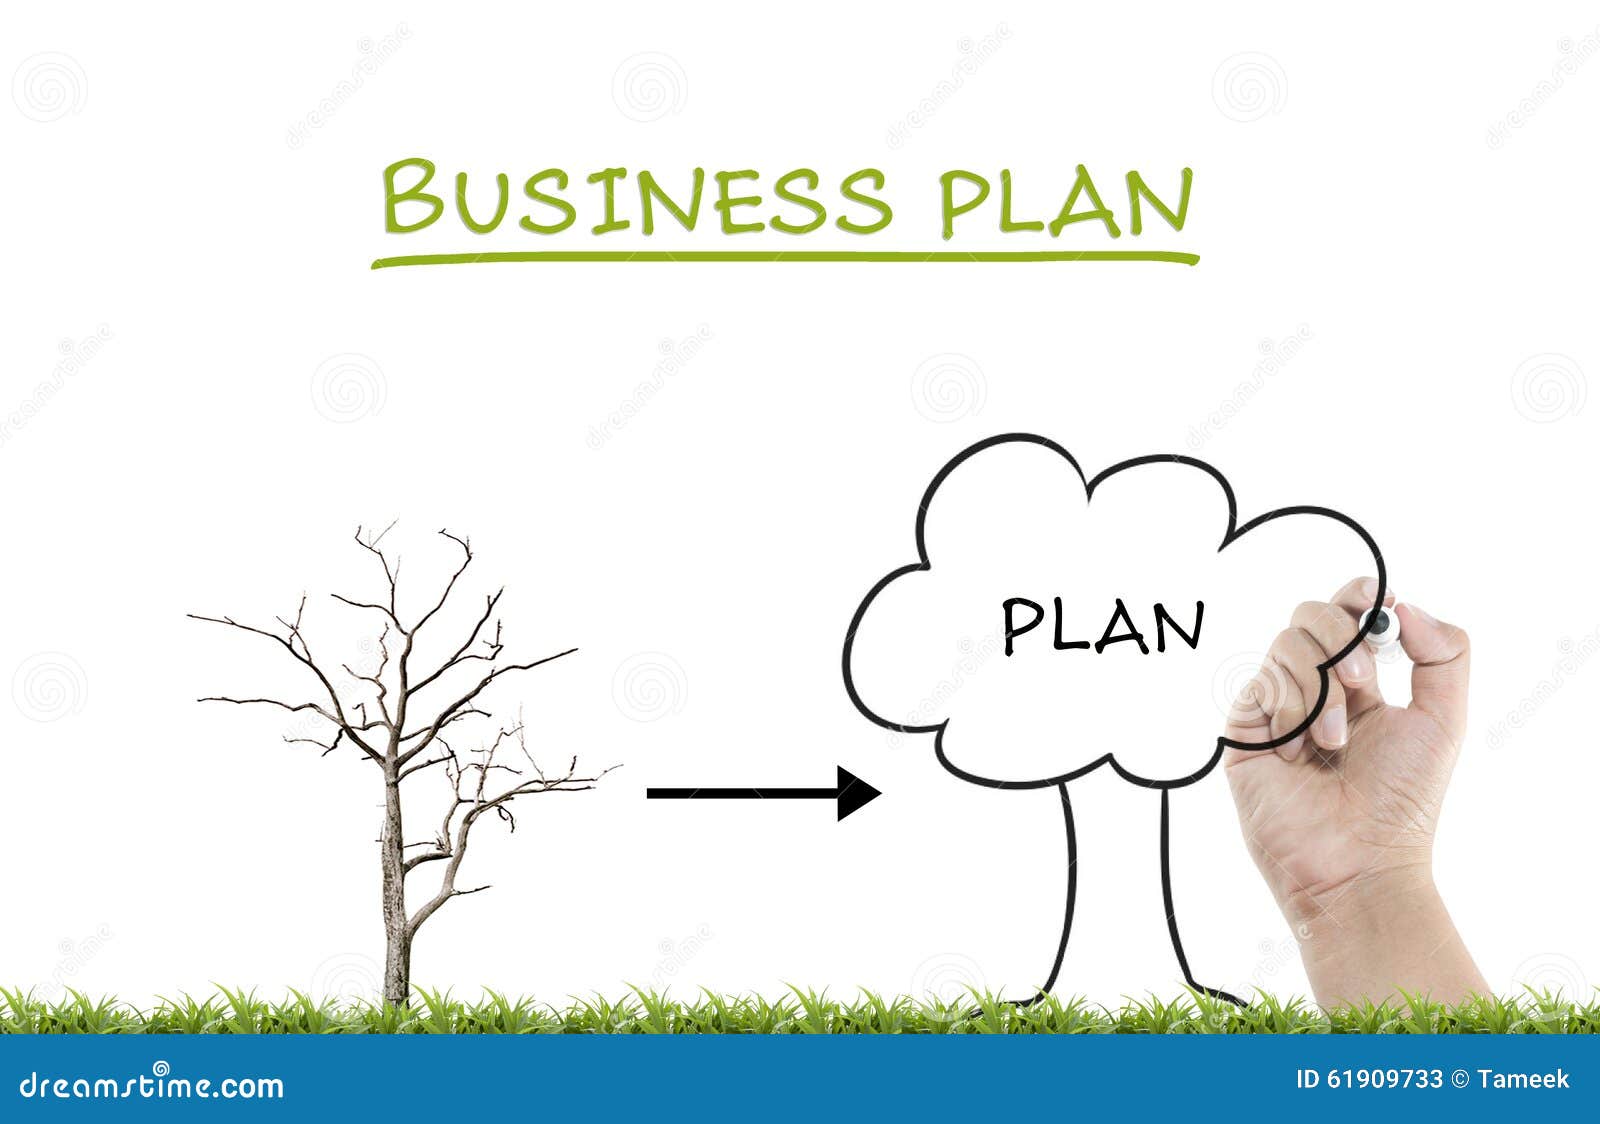 business plan writing services nyc